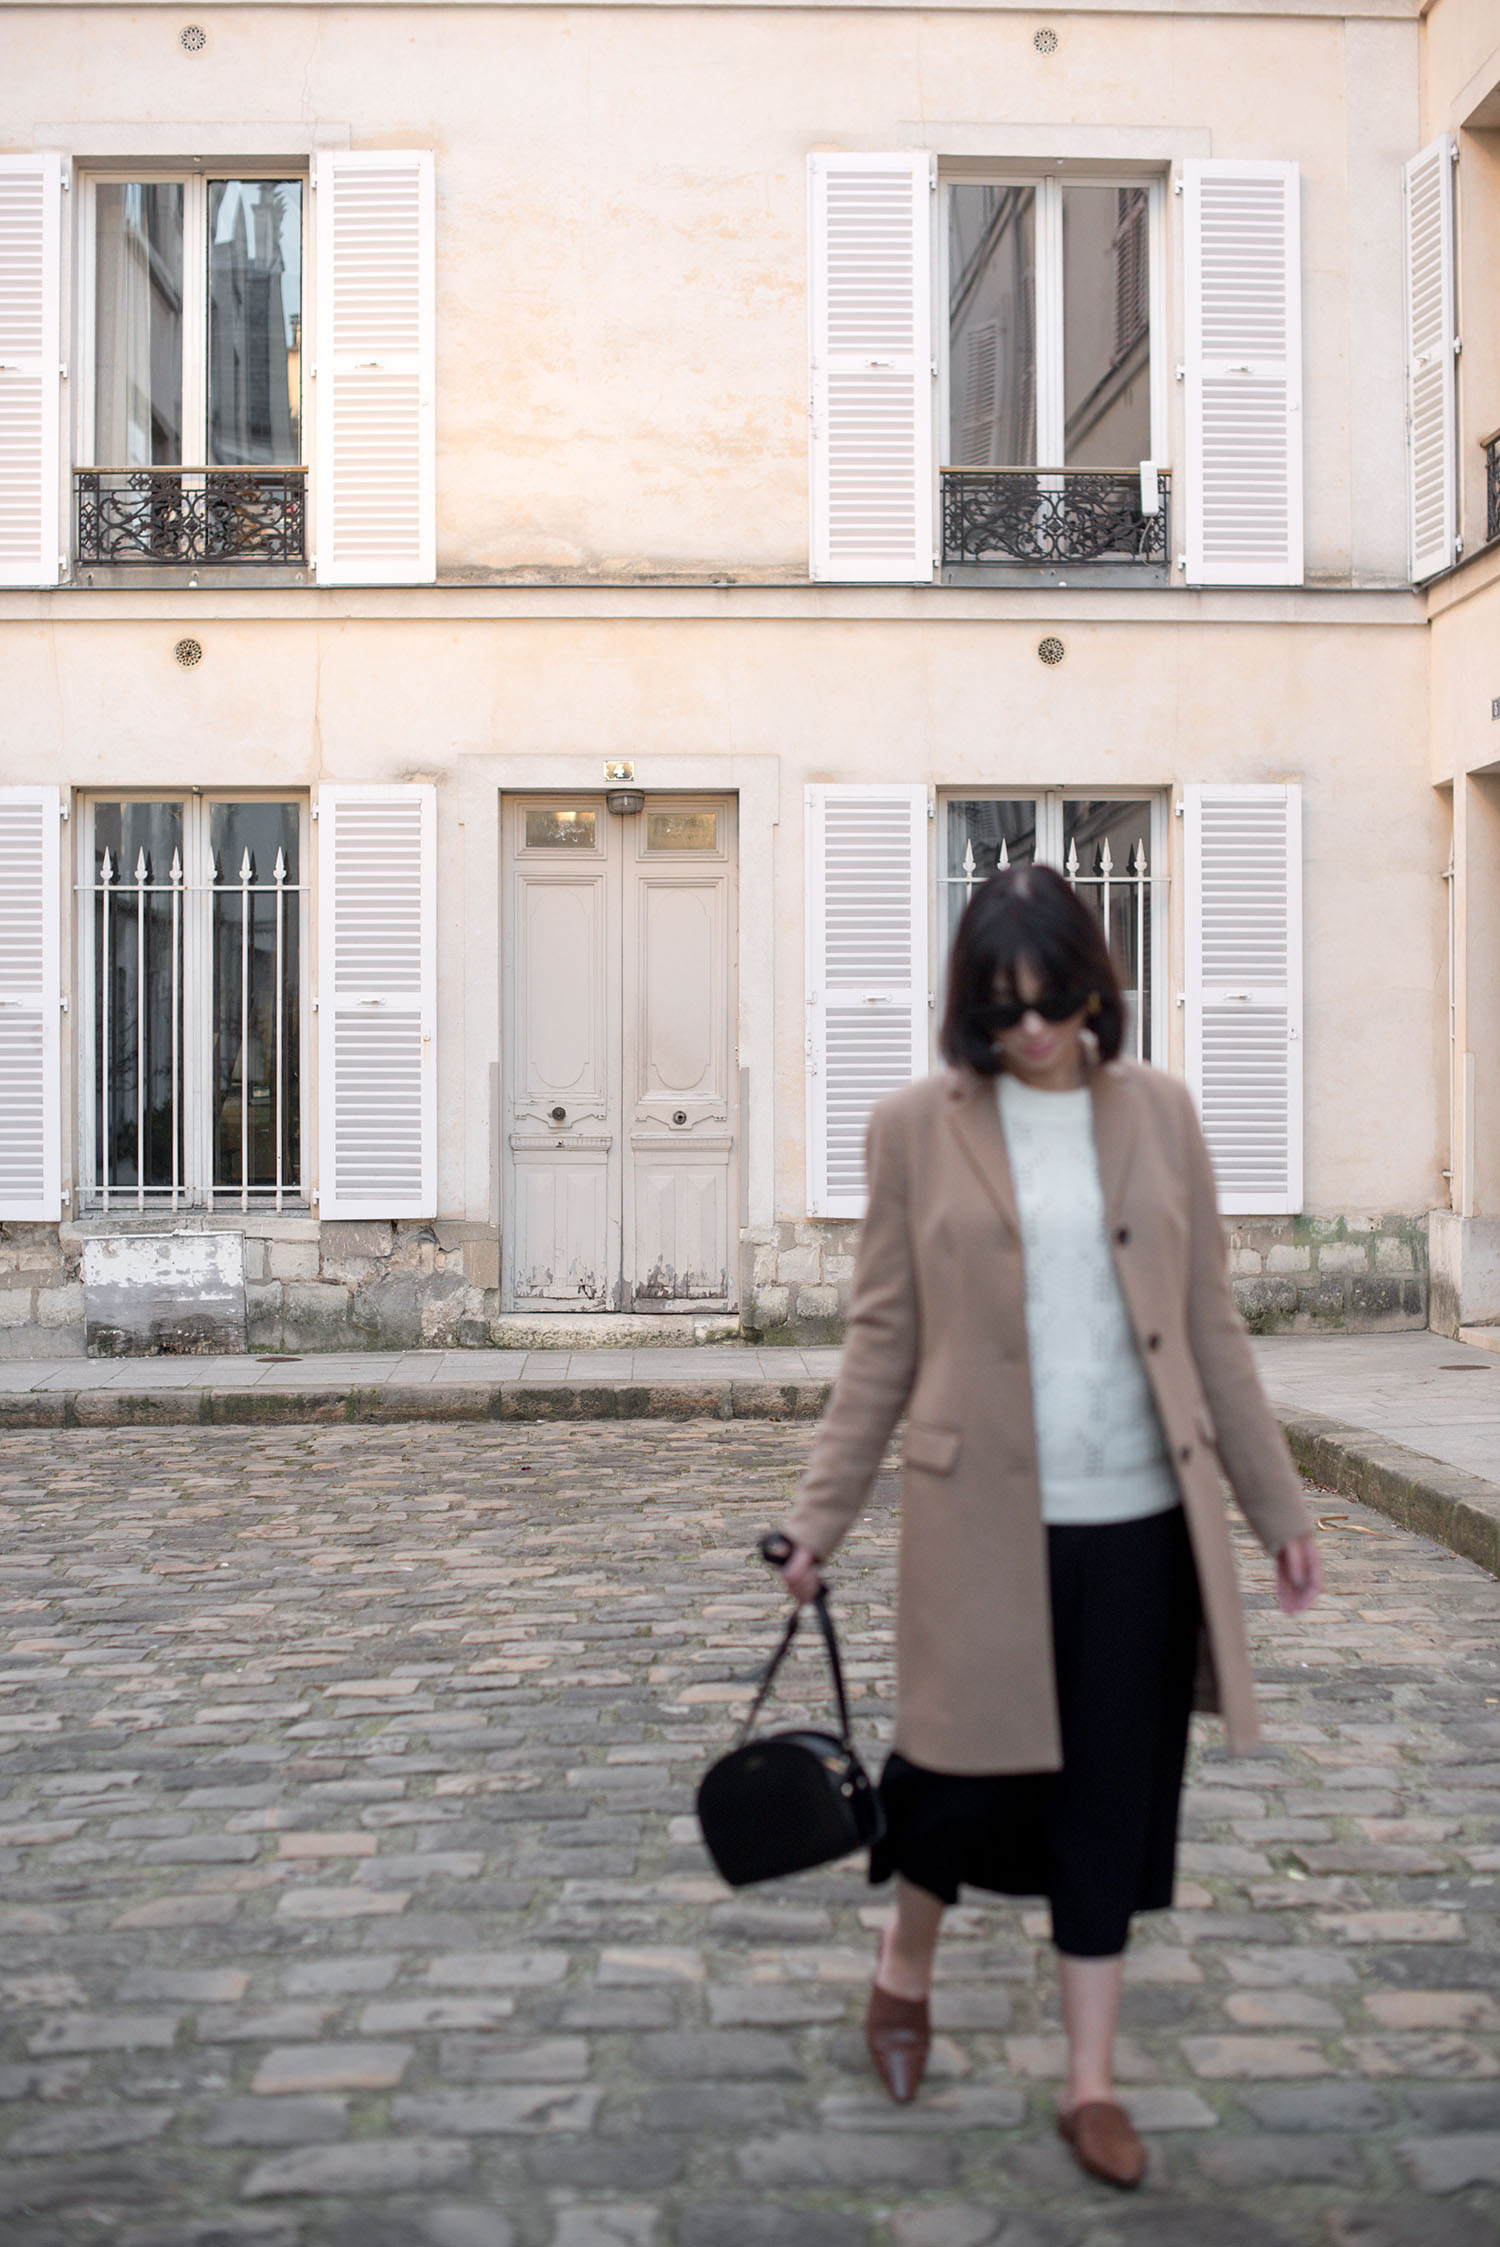 Top Winnipeg fashion blogger Cee Fardoe of Coco & Vera wears a Gap pointelle sweater and carries an APC half-moon bag in the Passage d'Enfer in Paris